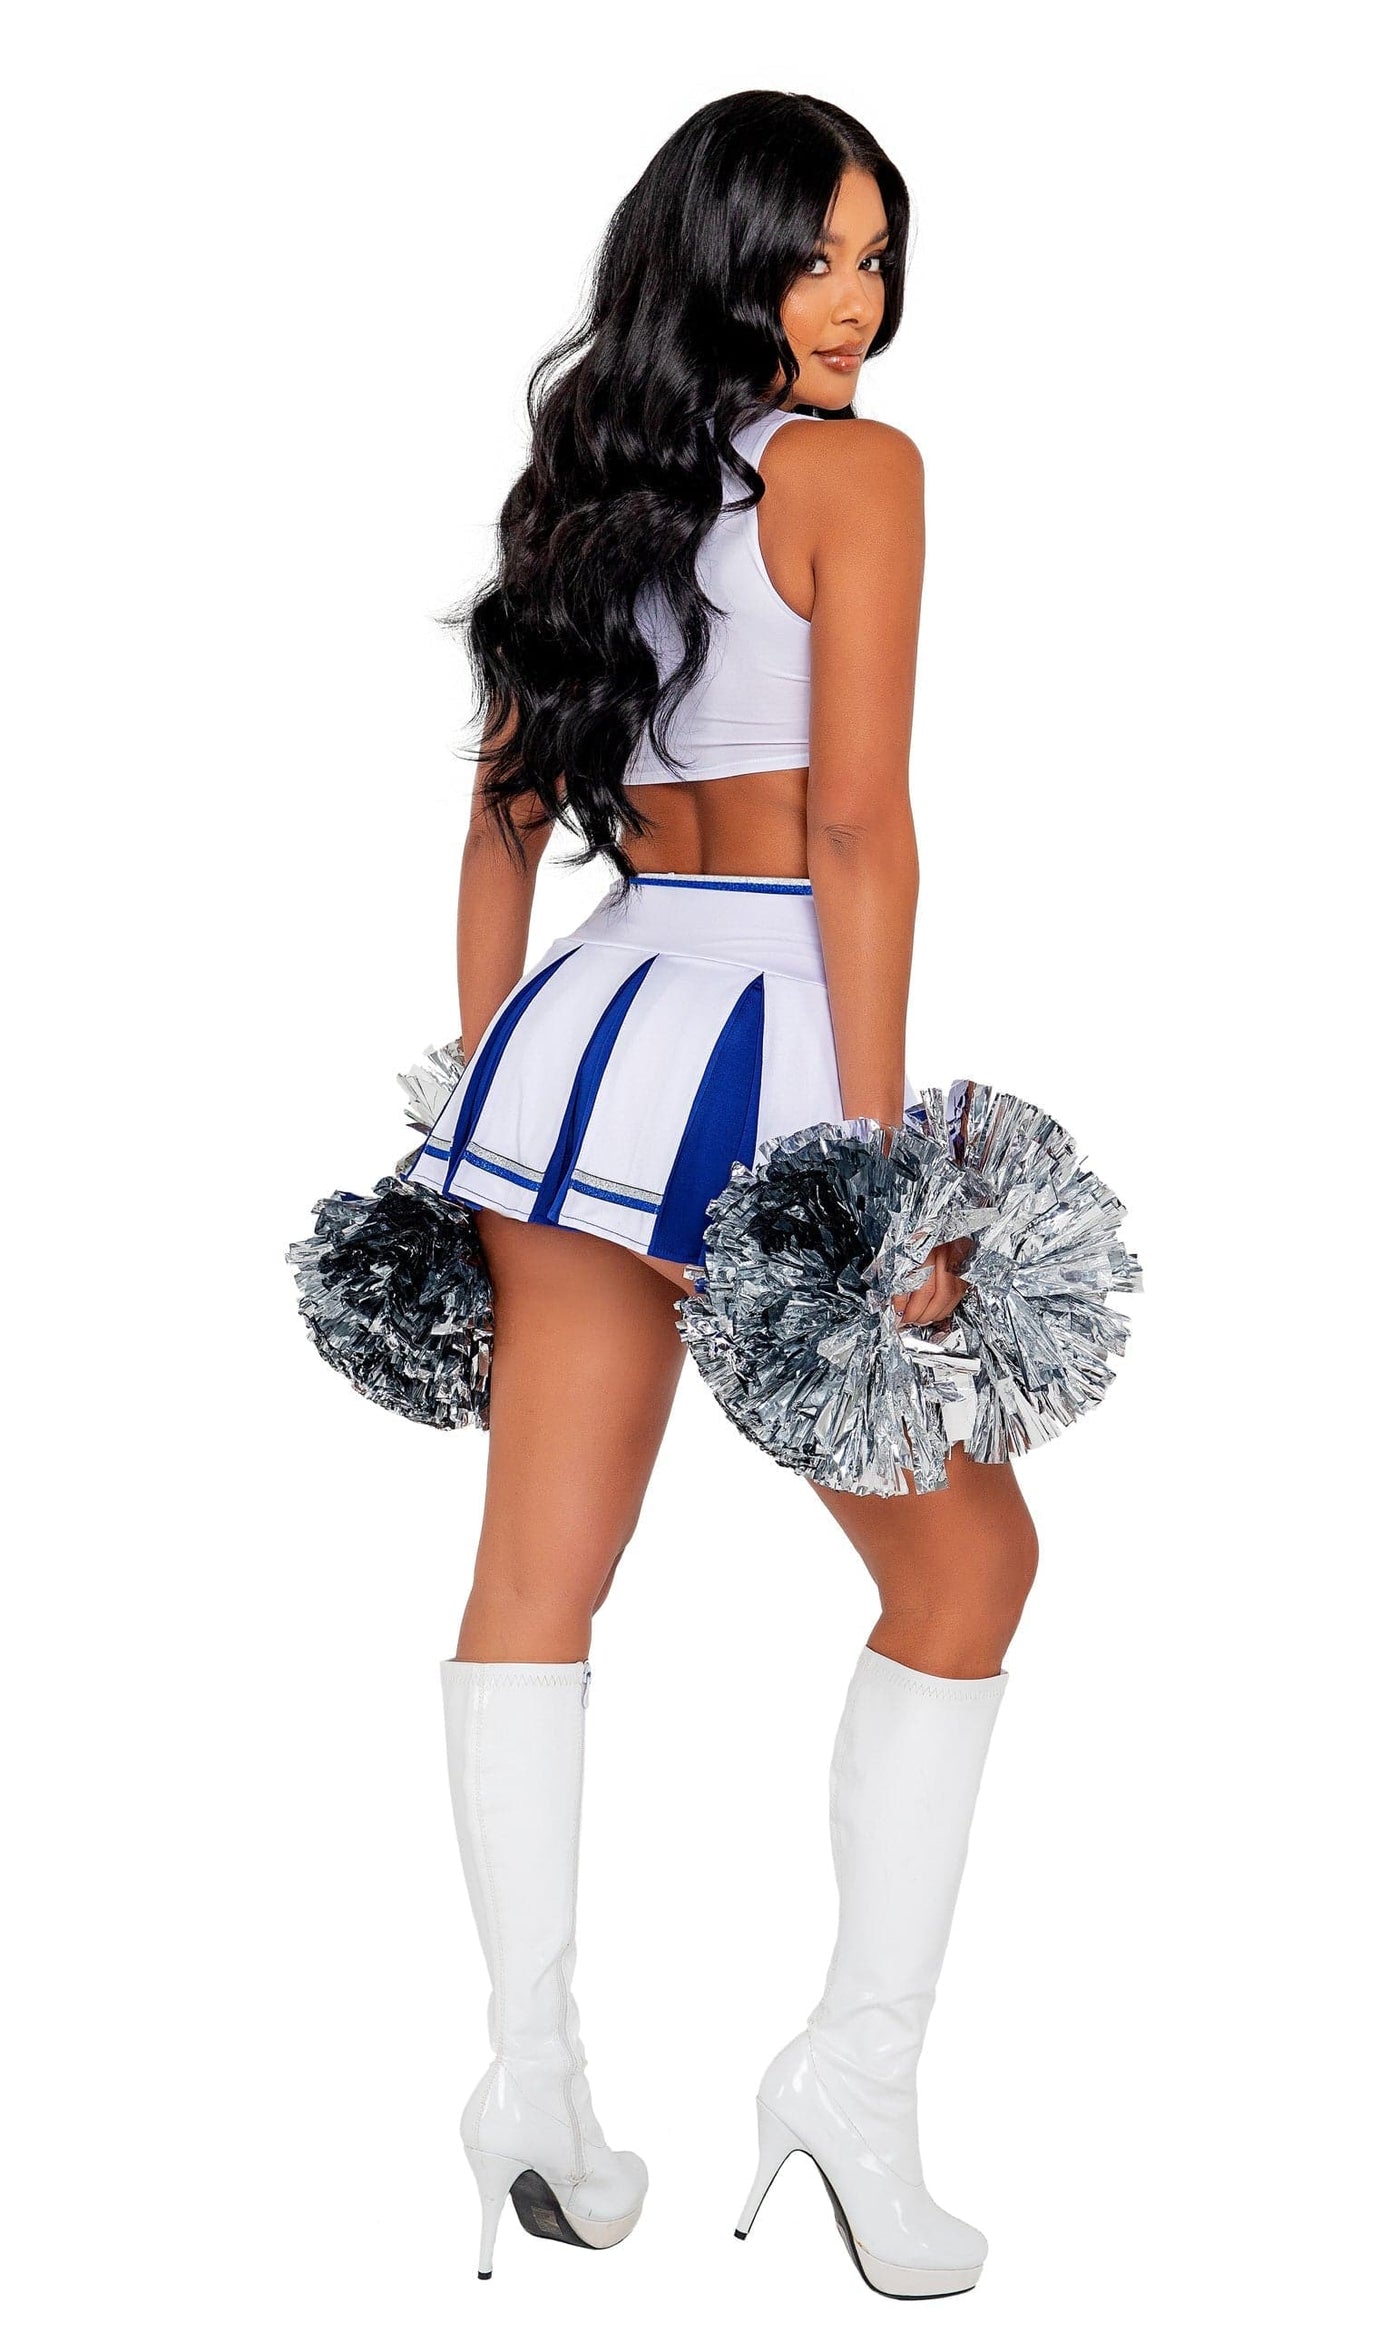 3pc. Official Playboy Bunny Cheer Squad Cheerleader Women's Costume - For Love of Lingerie